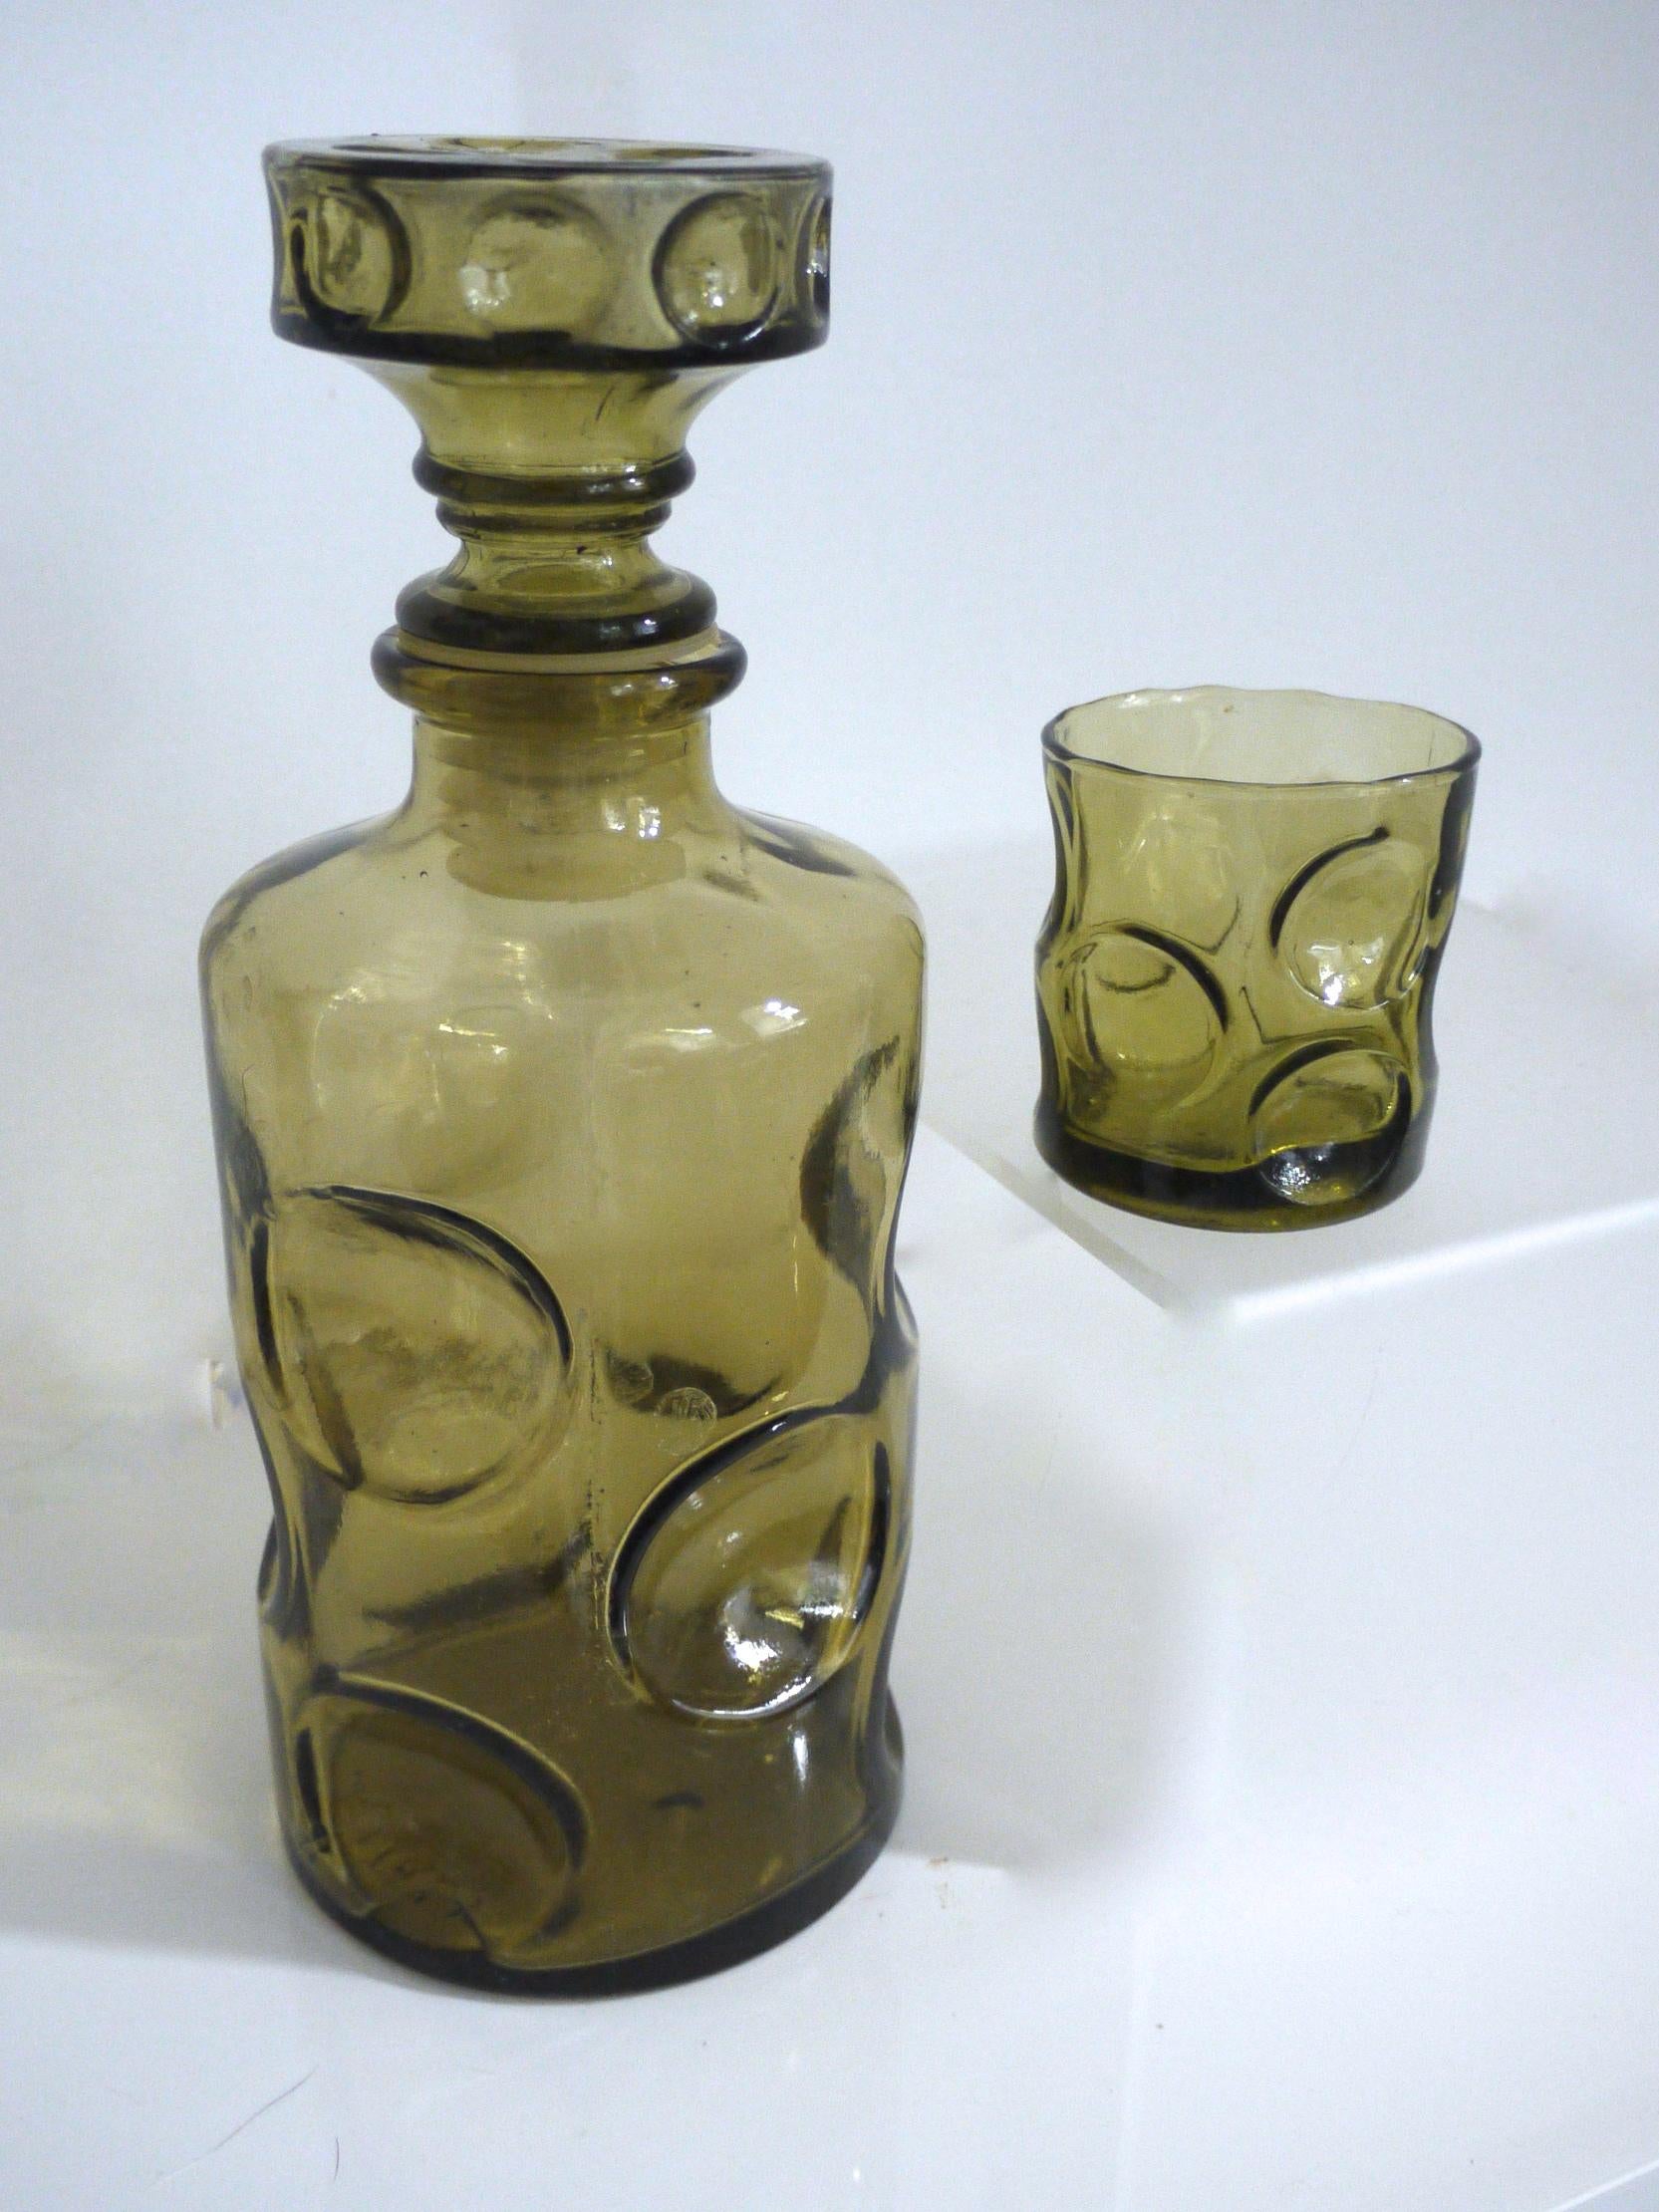 Modernist Empoli 'Dimpled' vase decanter and glass for one- 1950s pressed glass decanter 

Measures: Height 24 cms, diameter 10 cms

Tumbler
Height 6 cms, diameter 6 cms.